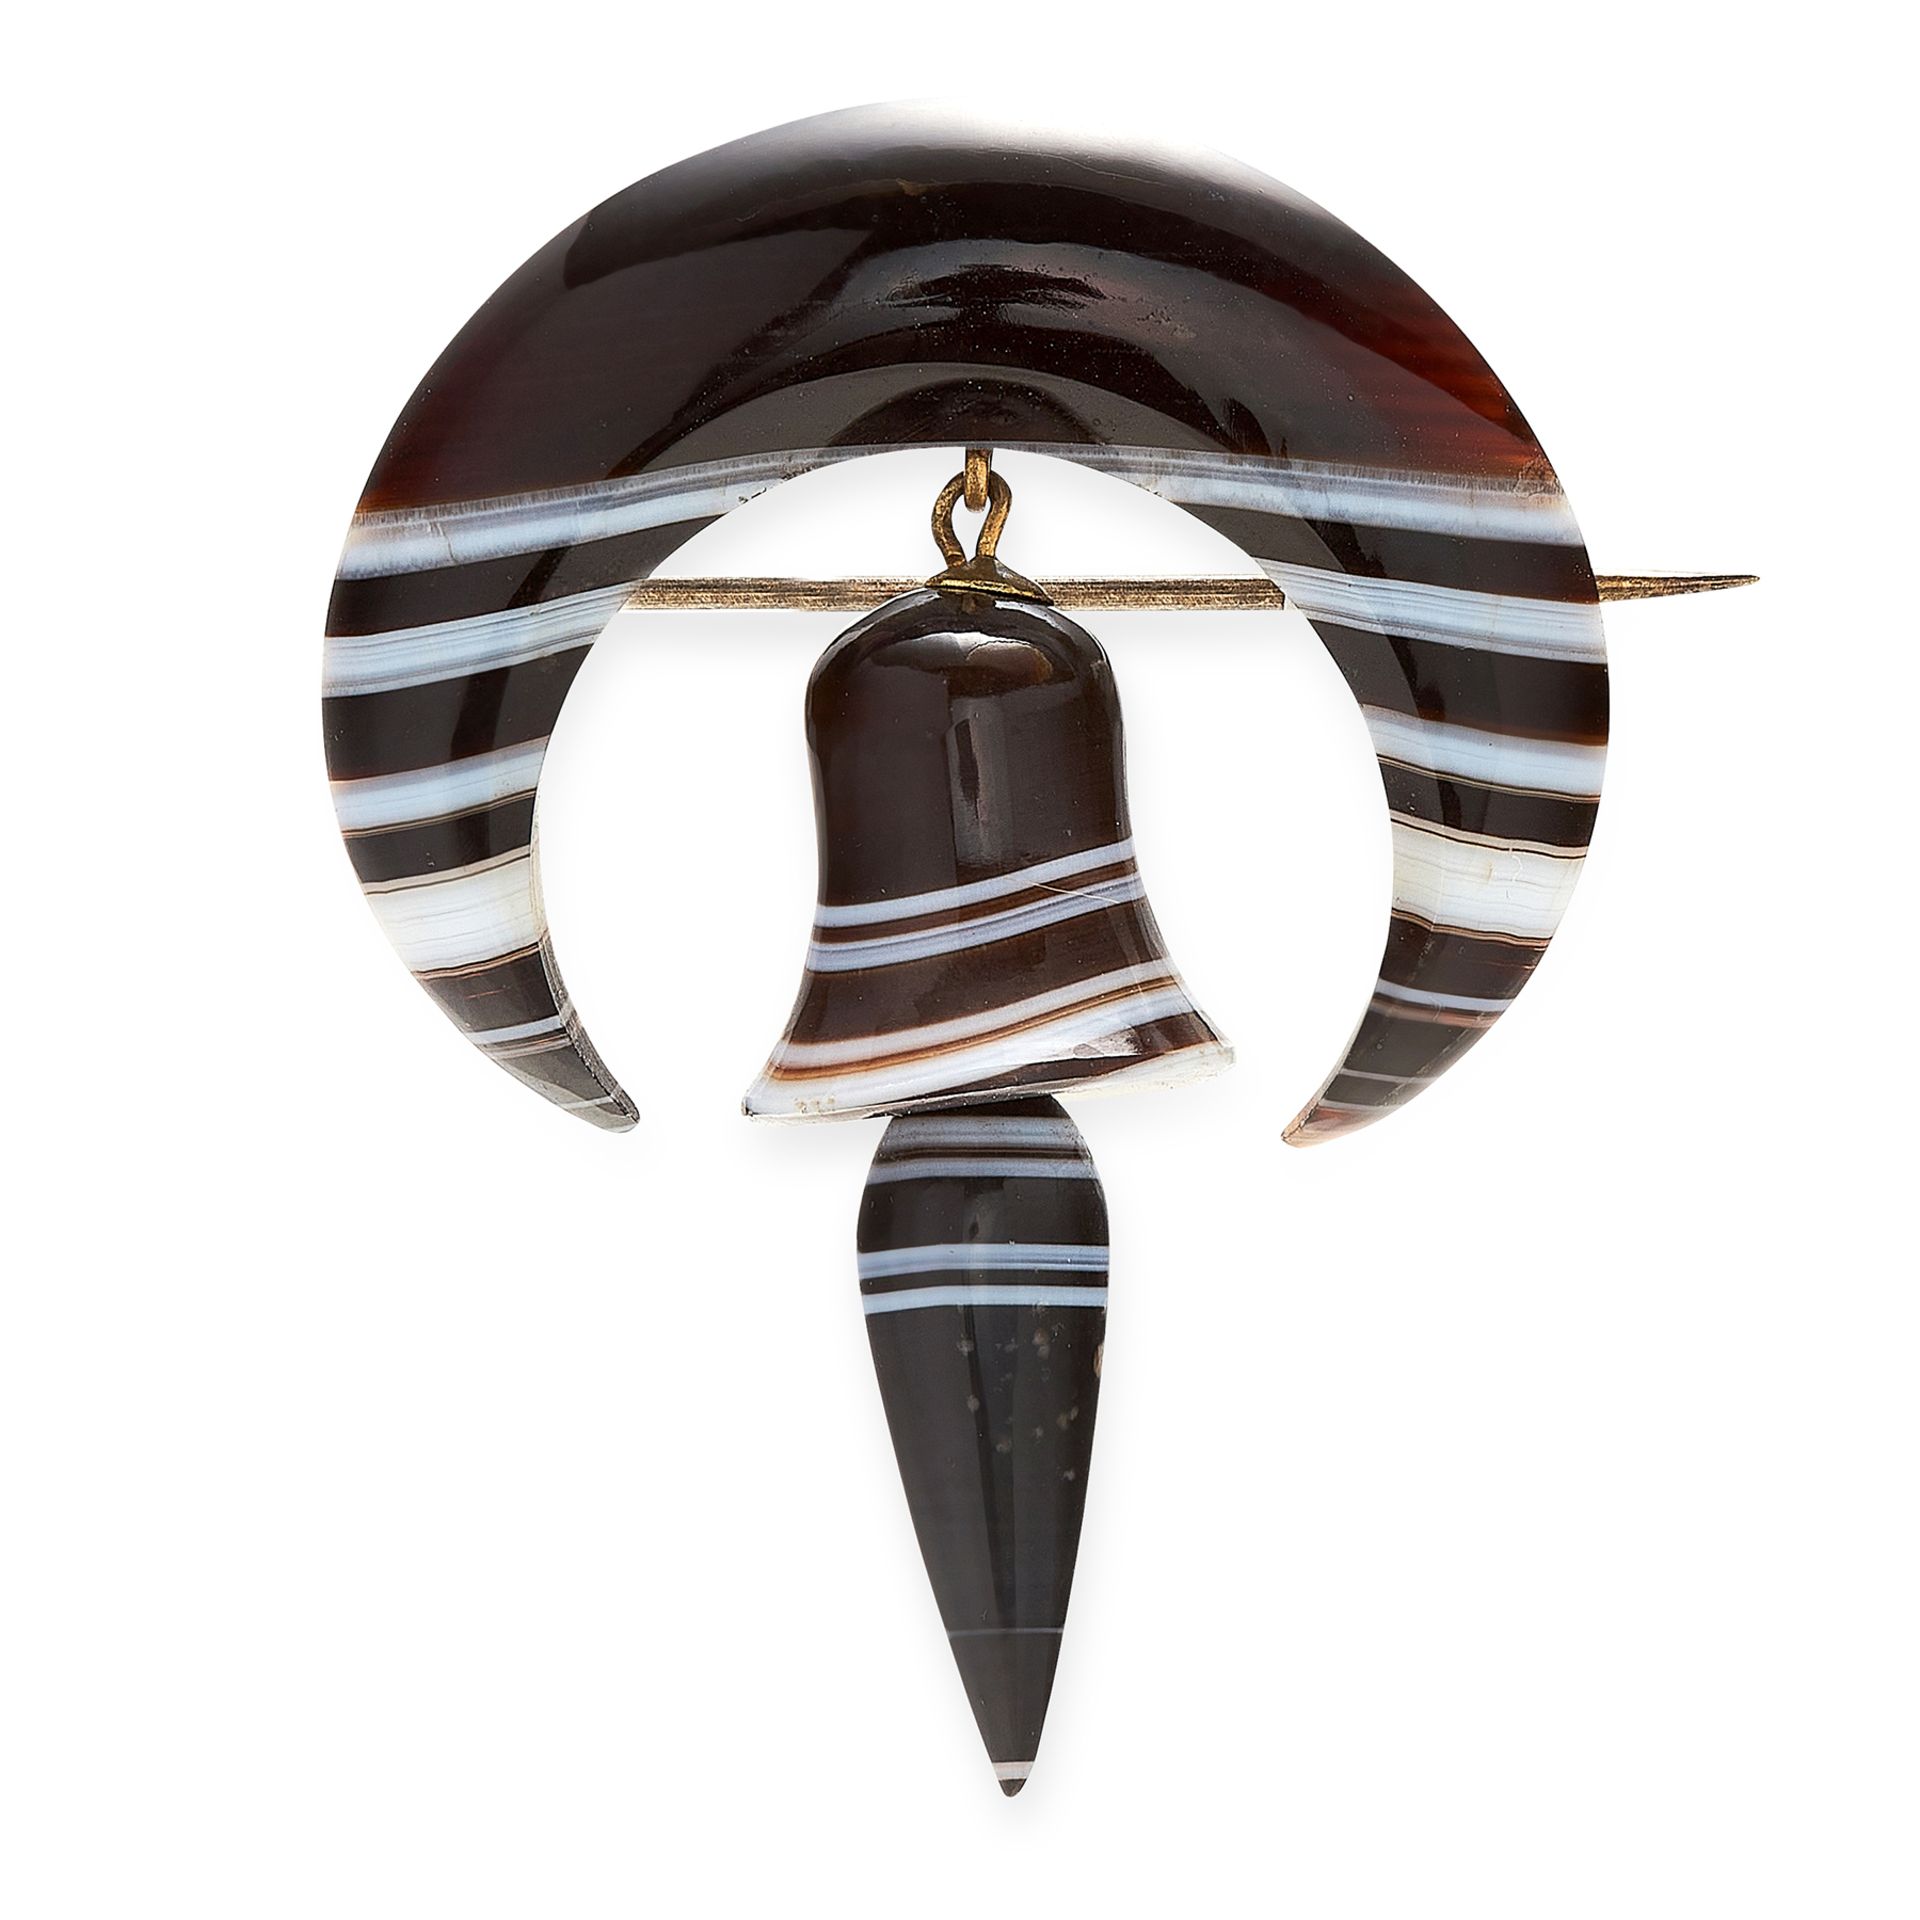 AN ANTIQUE BANDED AGATE BROOCH, 19TH CENTURY comprising a polished piece of banded agate in the form